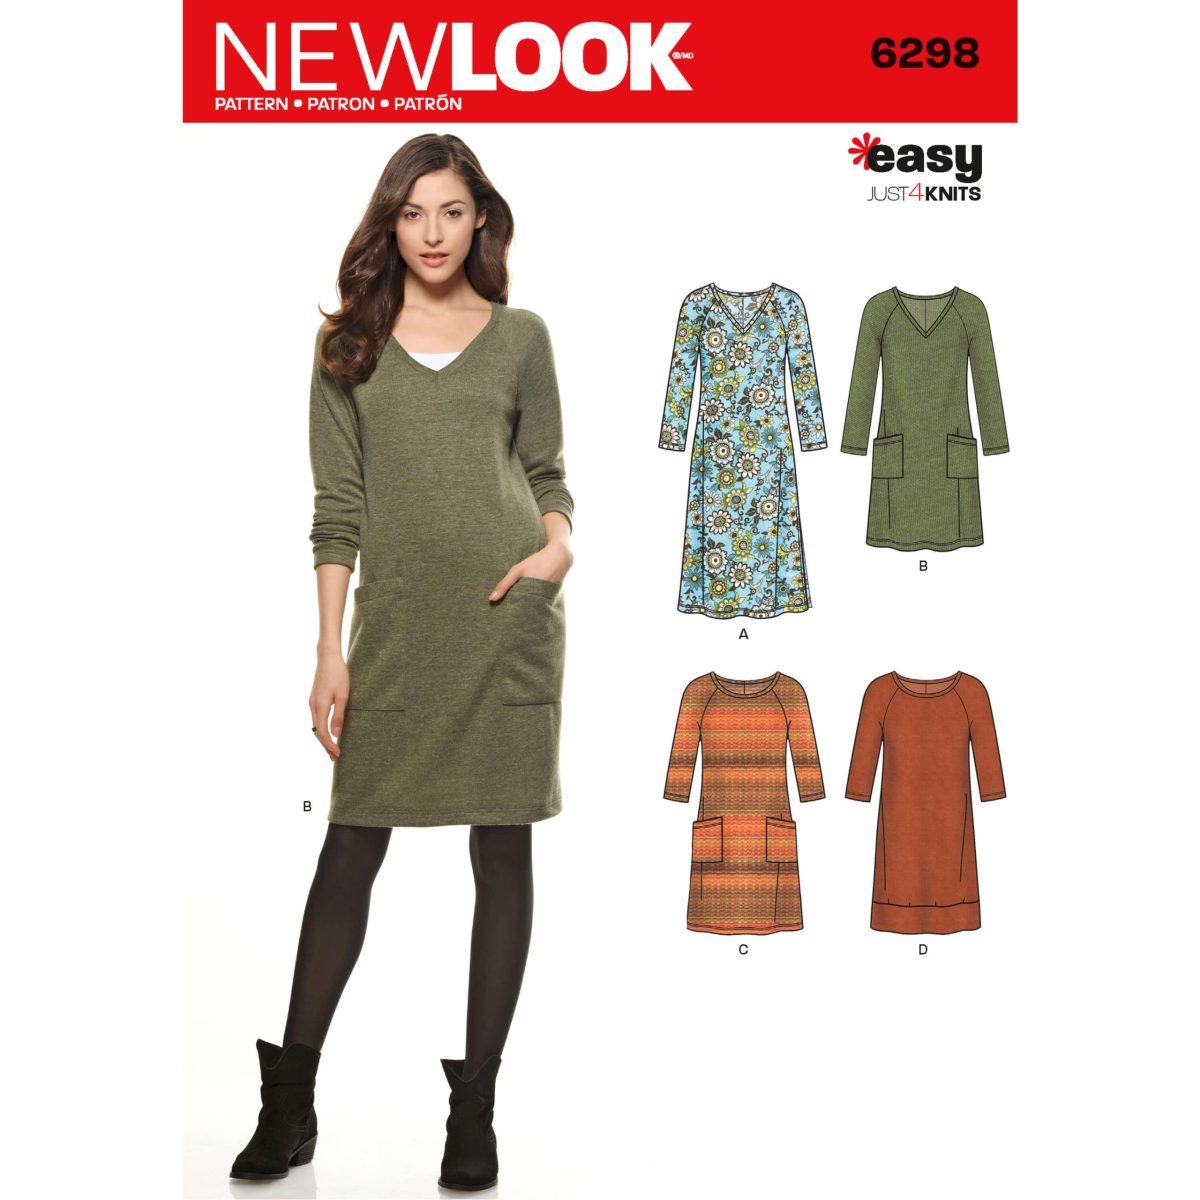 New Look Sewing Pattern N6298 Misses' Knit Dress with Neckline & Length Variations